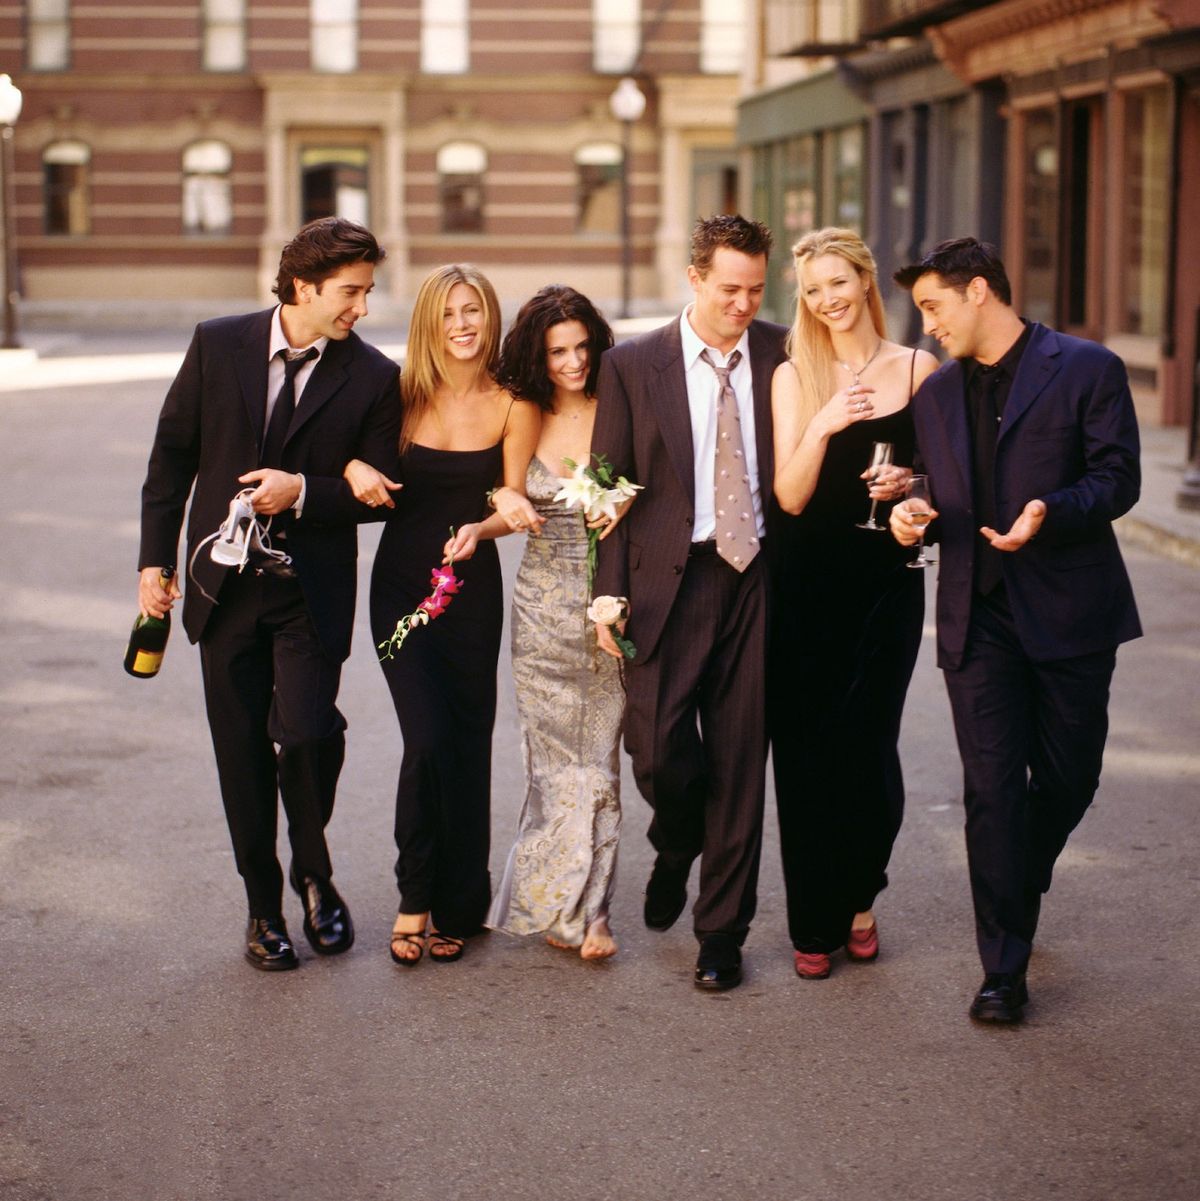 cast of friends walking down the street fangirl mentality and chaos theory